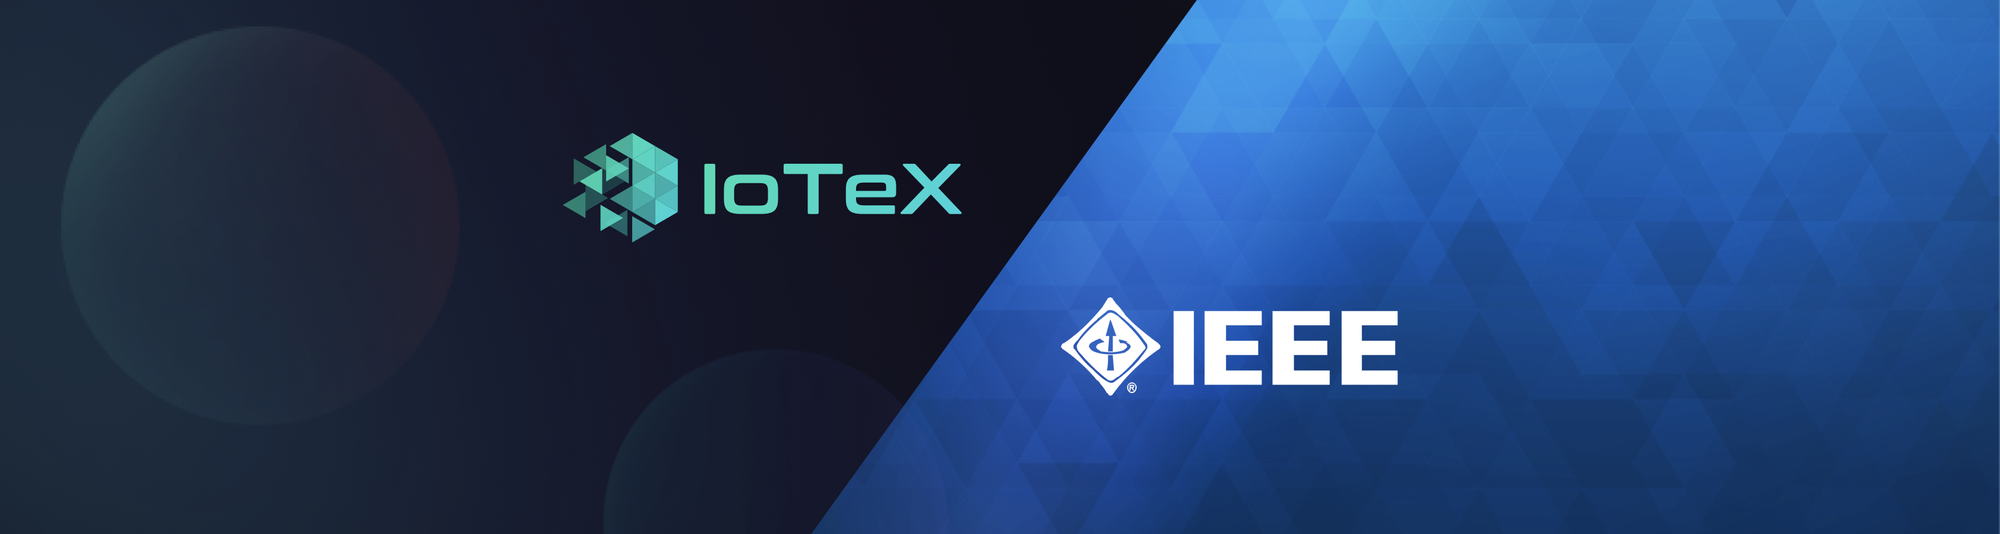 IoTeX Elected Vice Chair of IEEE Blockchain & IoT Standard Working Group (P2418.1)